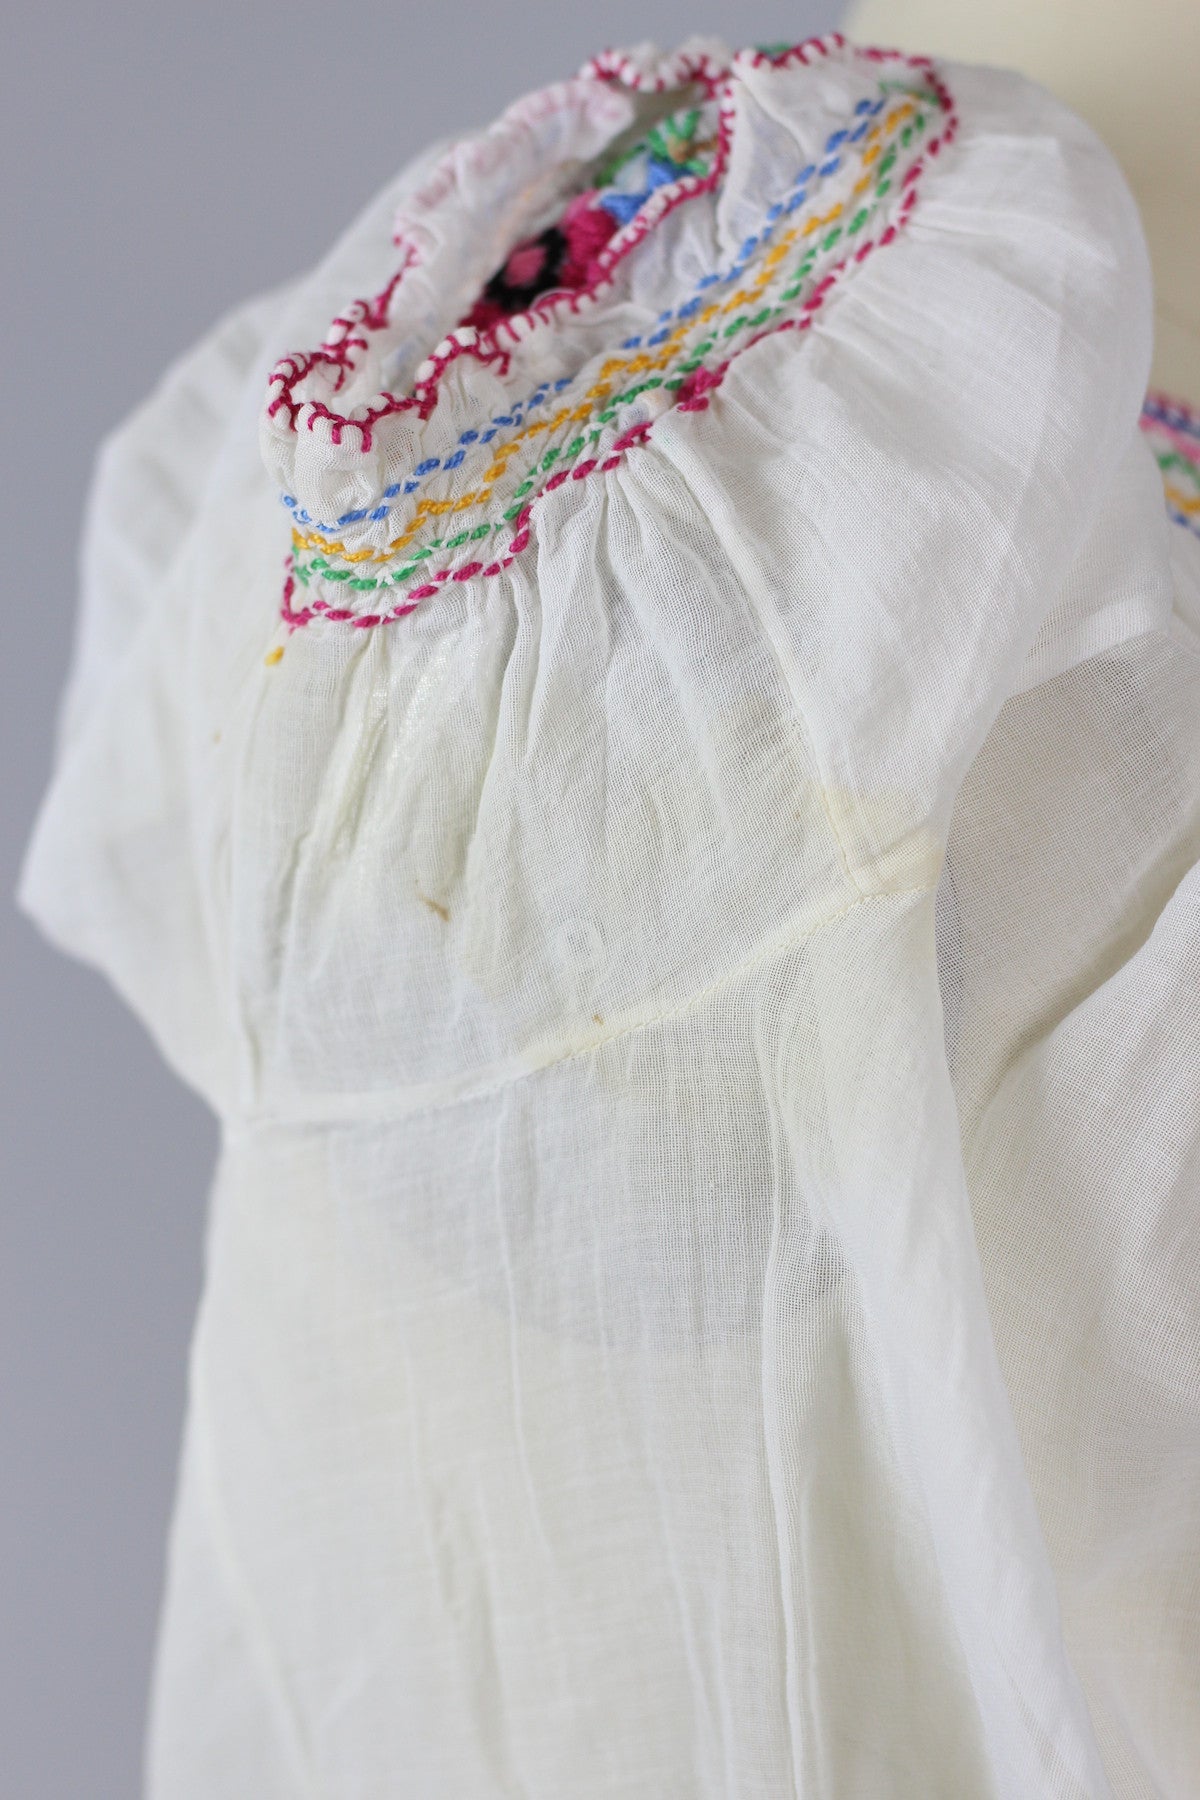 1930s Hungarian Bohemian Hand Embroidered Blouse